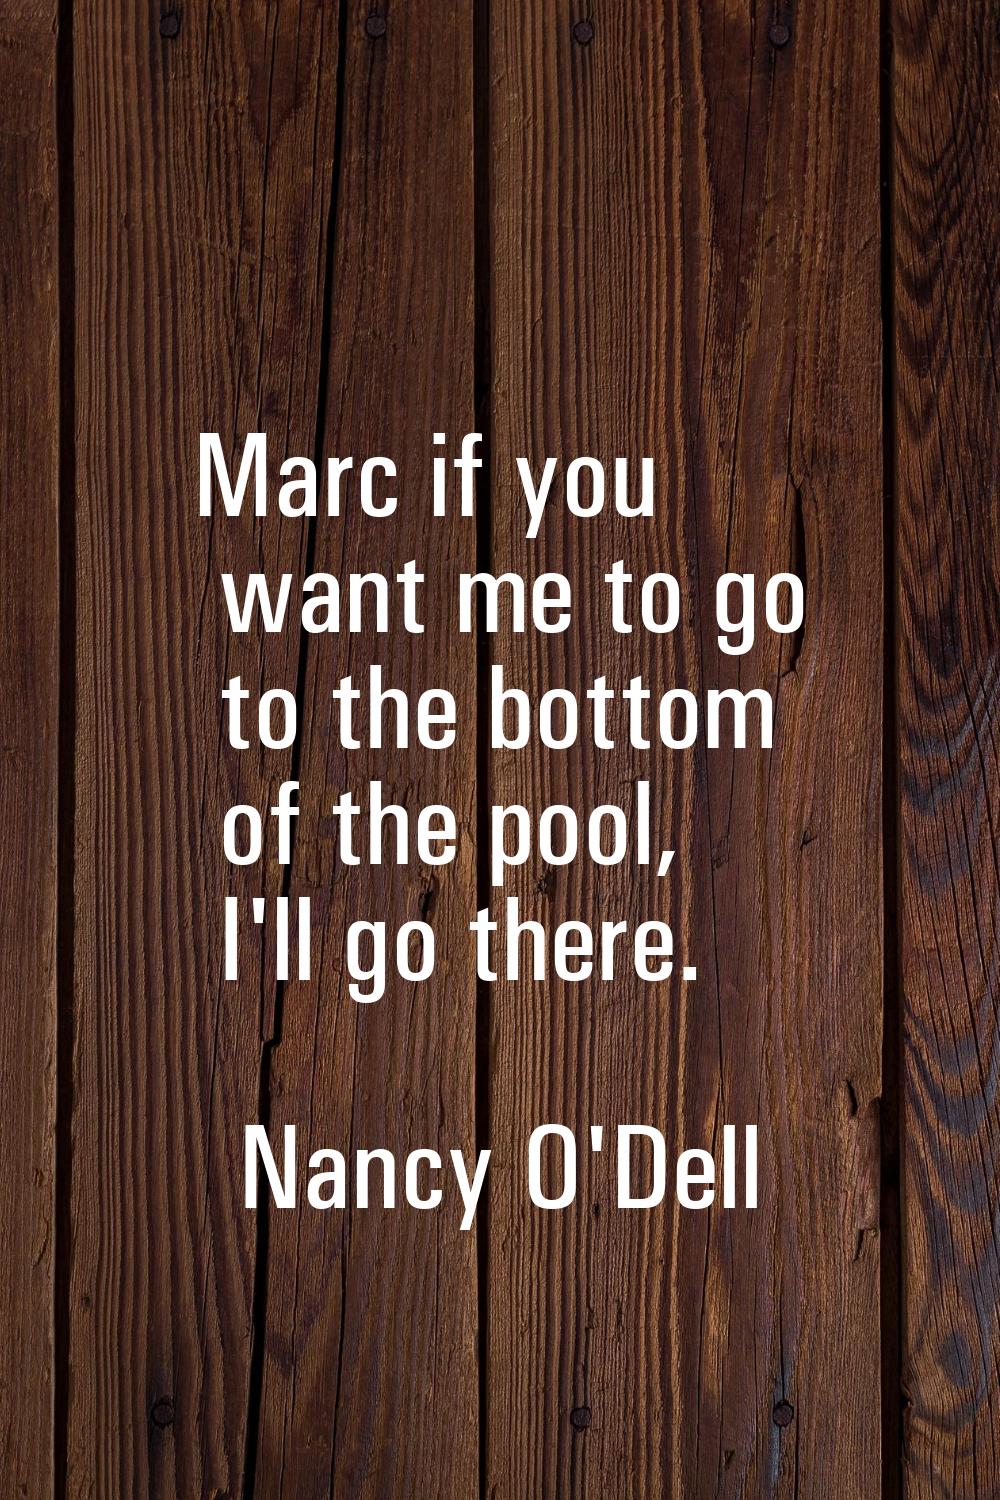 Marc if you want me to go to the bottom of the pool, I'll go there.